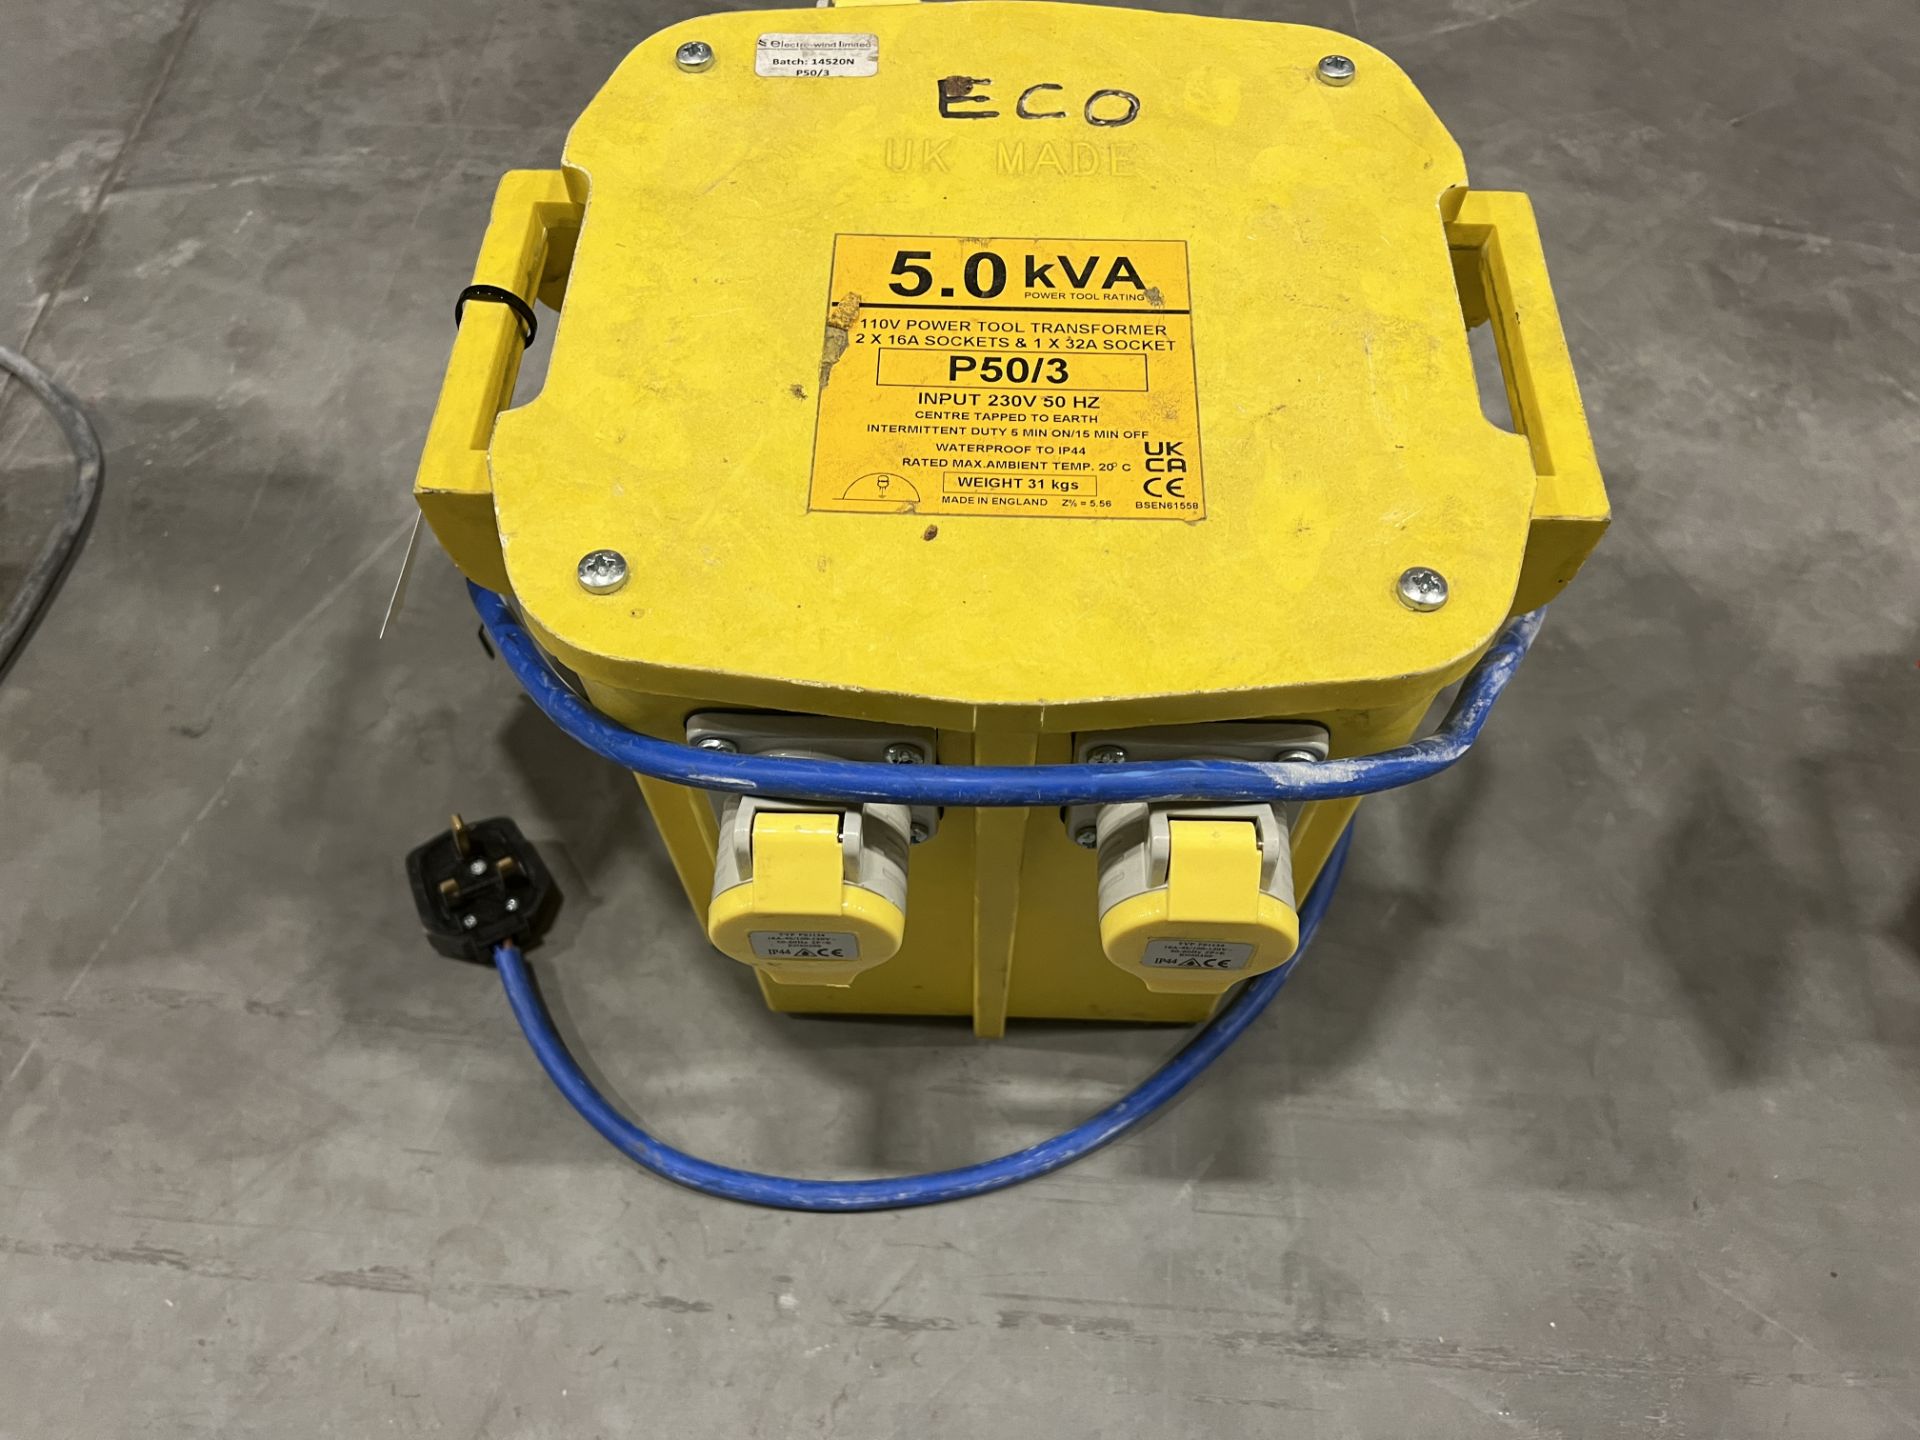 Electro - Wind Ltd P50/3 - 230 volt to 110 volt power tool stepdown transformer duty rated at